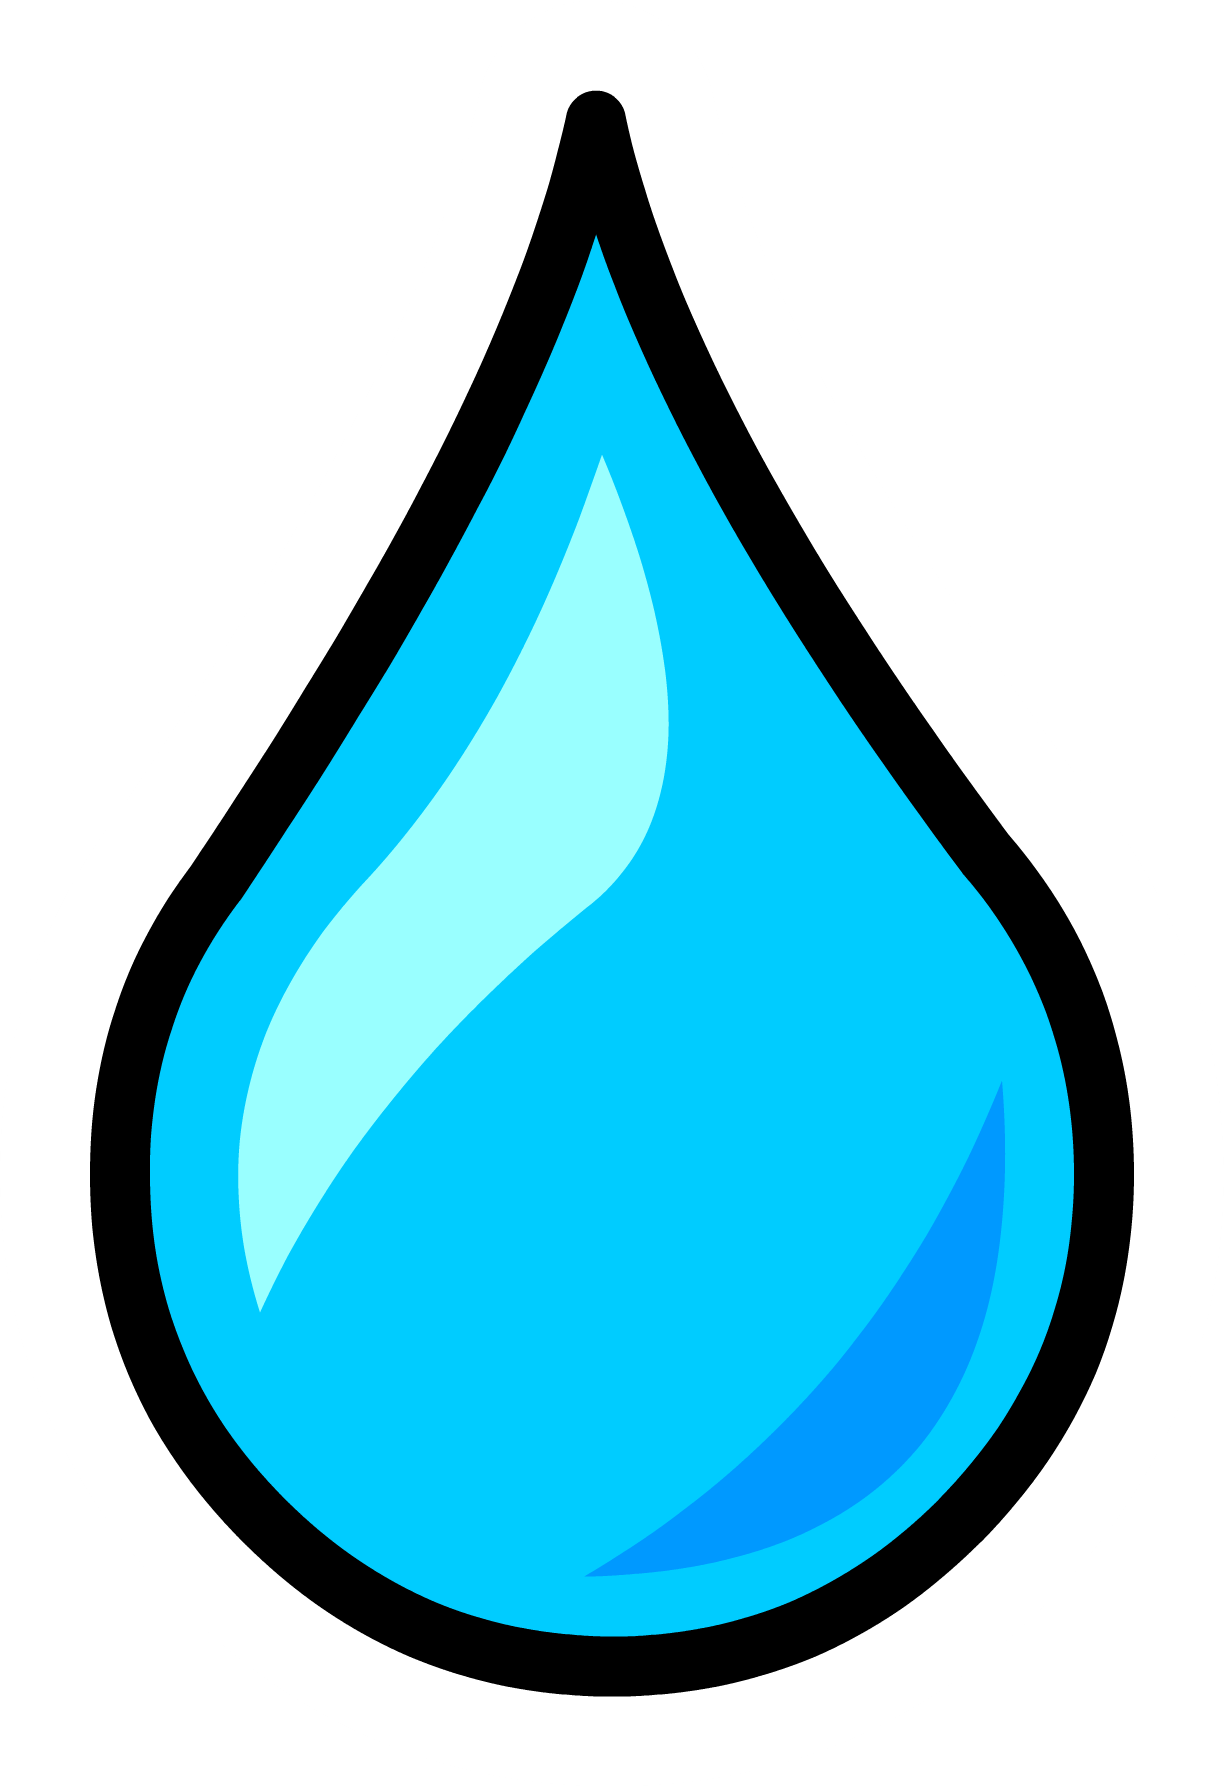 Words clipart water. Droplet pin club penguin